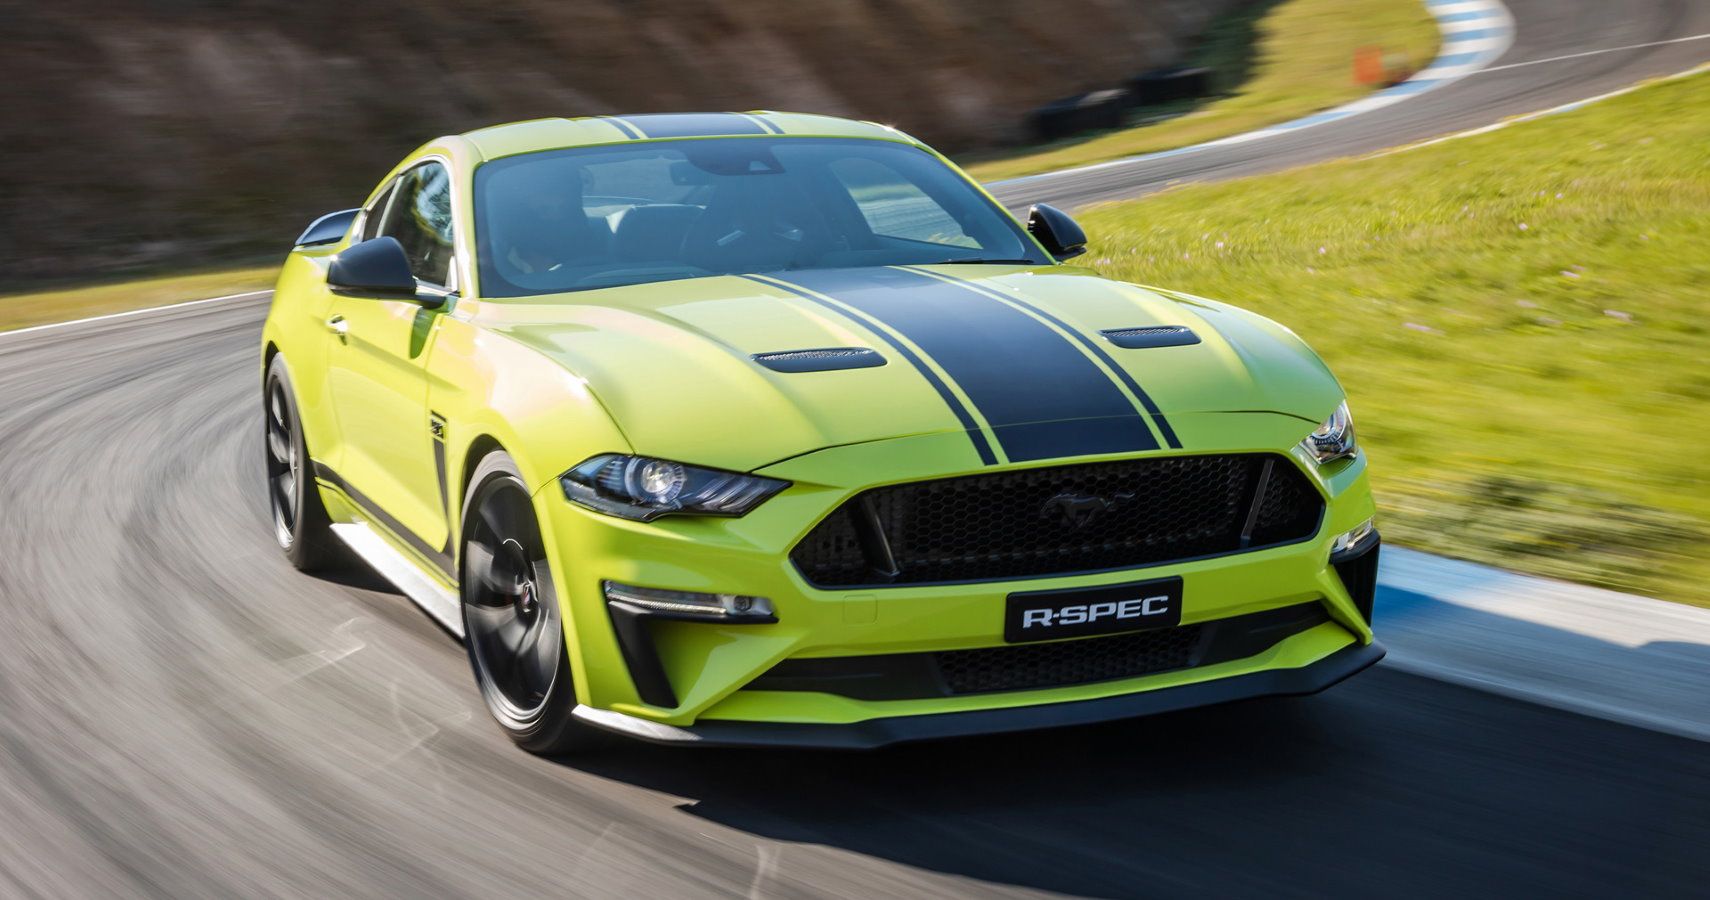 Australia Gets Supercharged 700-HP Mustang R-Spec